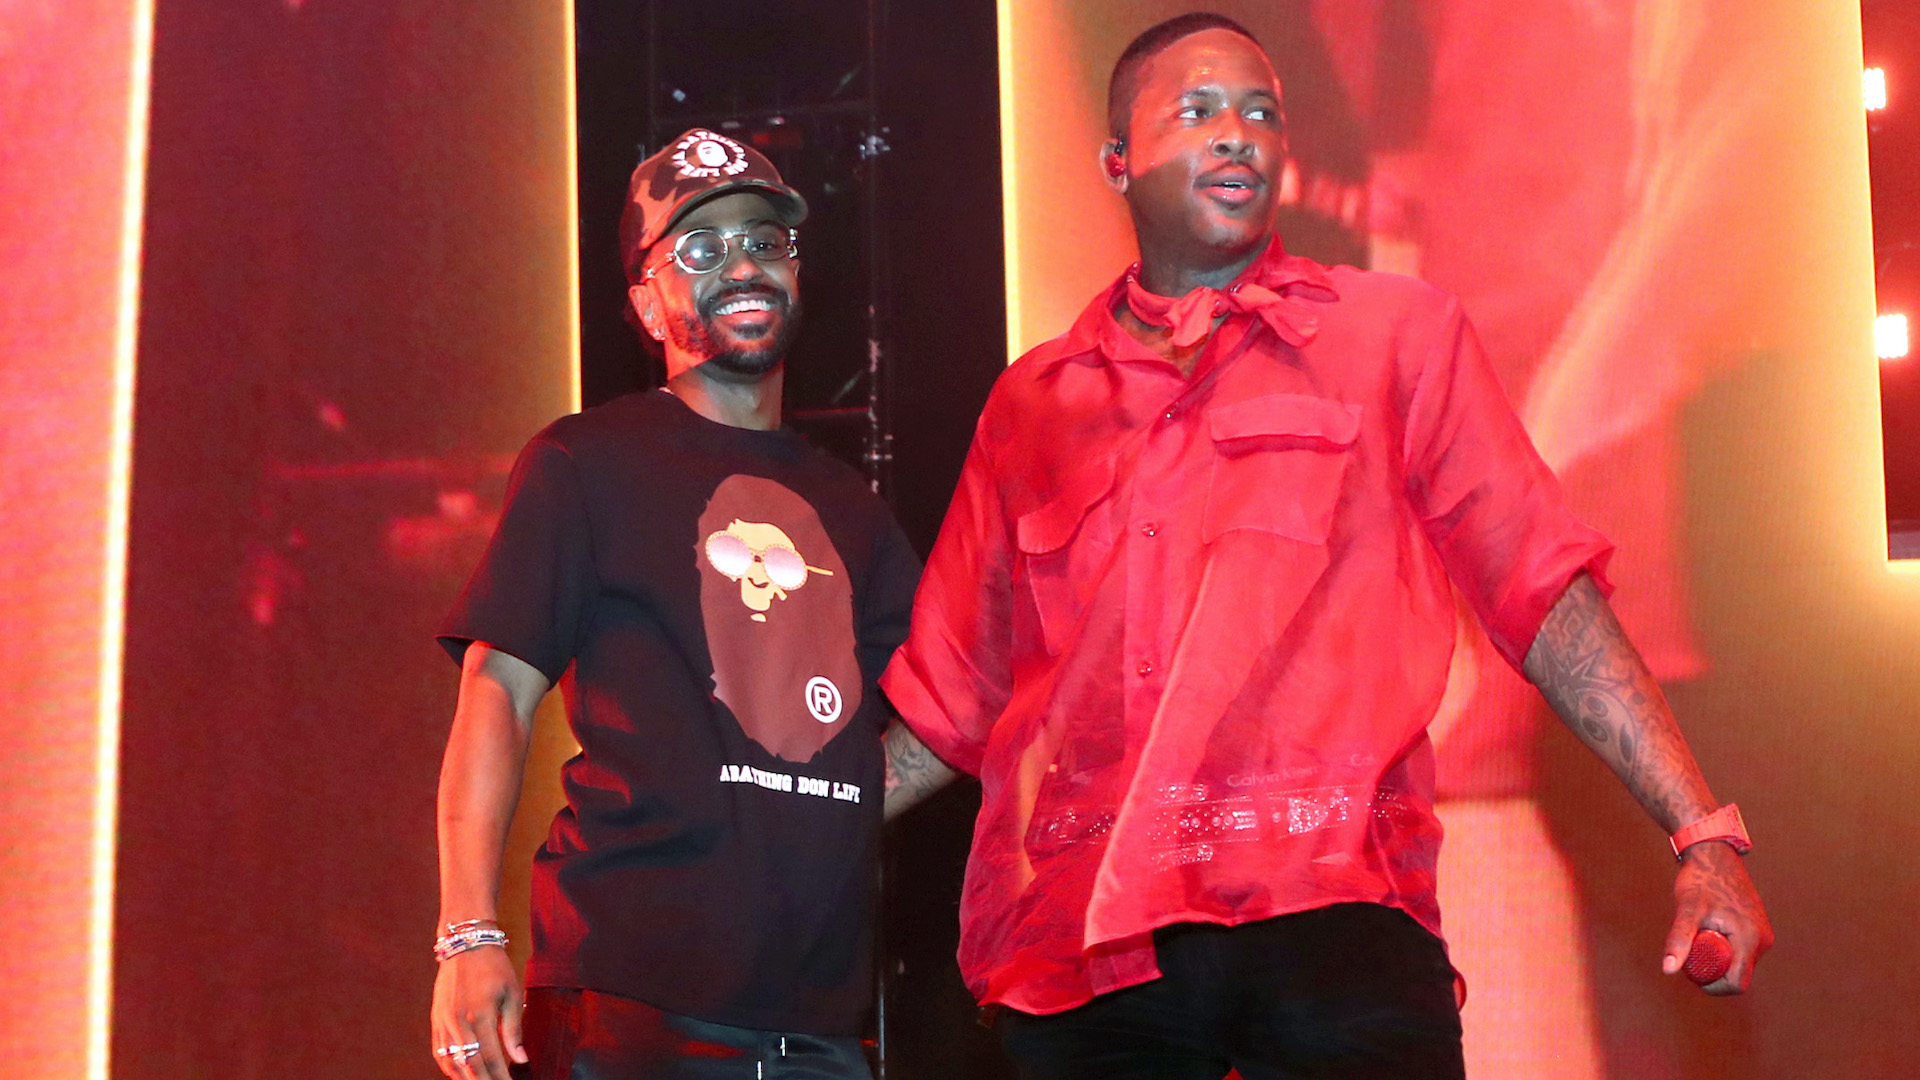 Big Sean and YG Connect on New Track “Go Big”